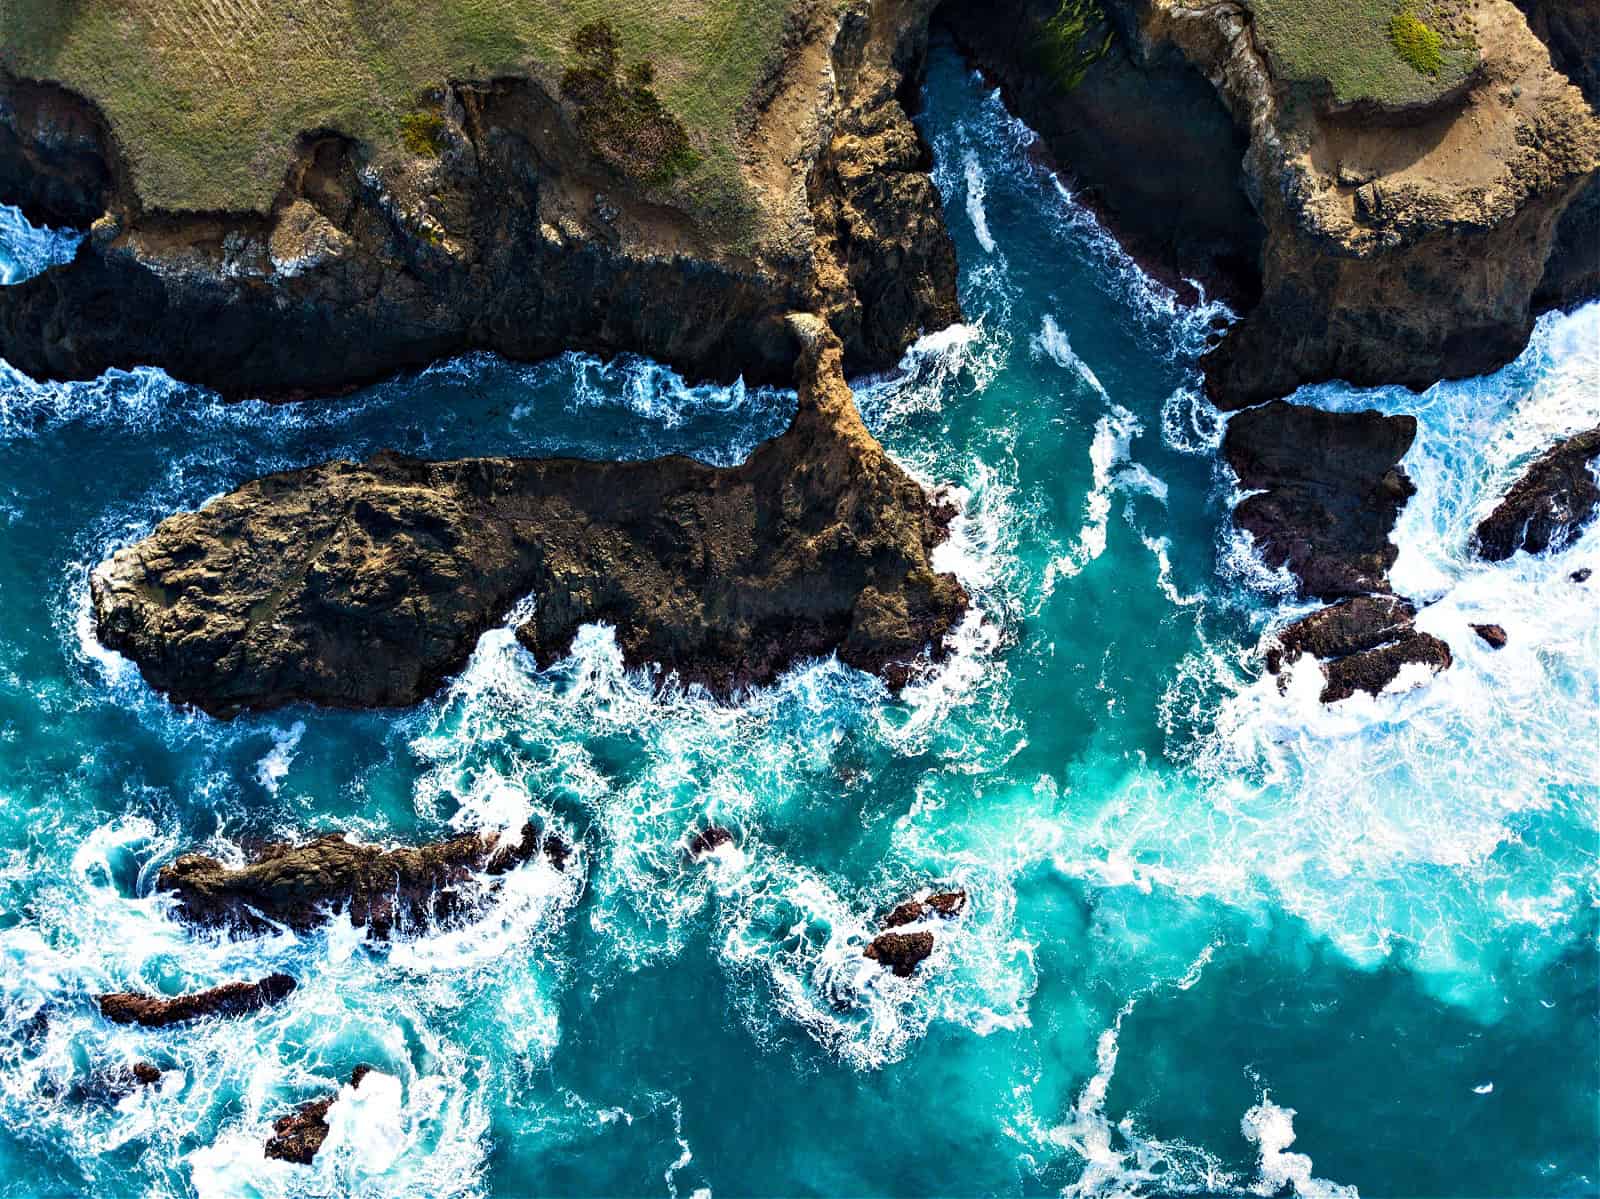 An aerial view of the Mendocino coast in northern California shows the cold, colorful waters of the Pacific Ocean crashing against the rocky shoreline.